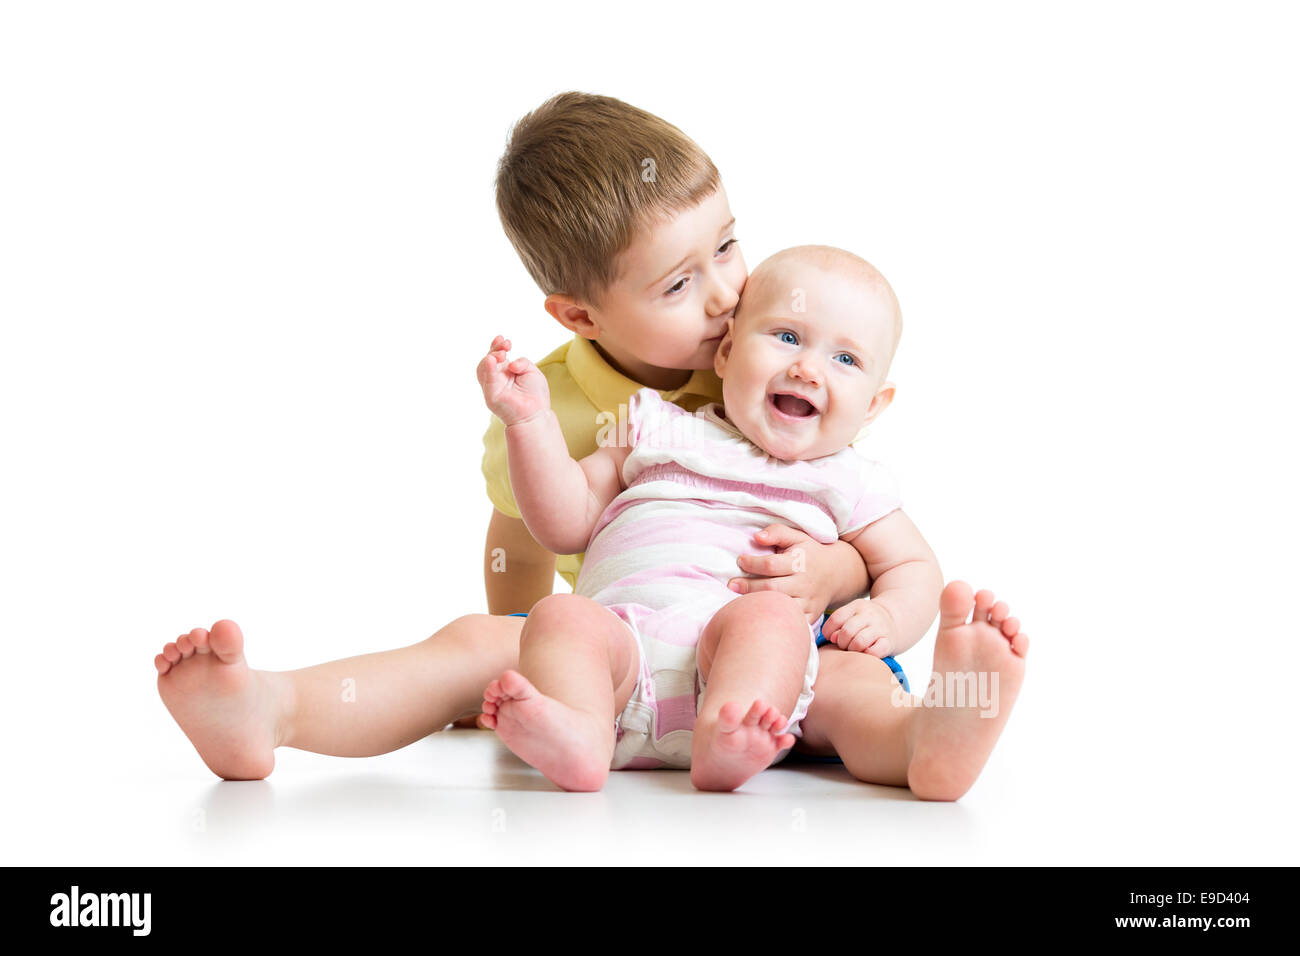 Loving brother kissing baby sister isolated on white Stock Photo